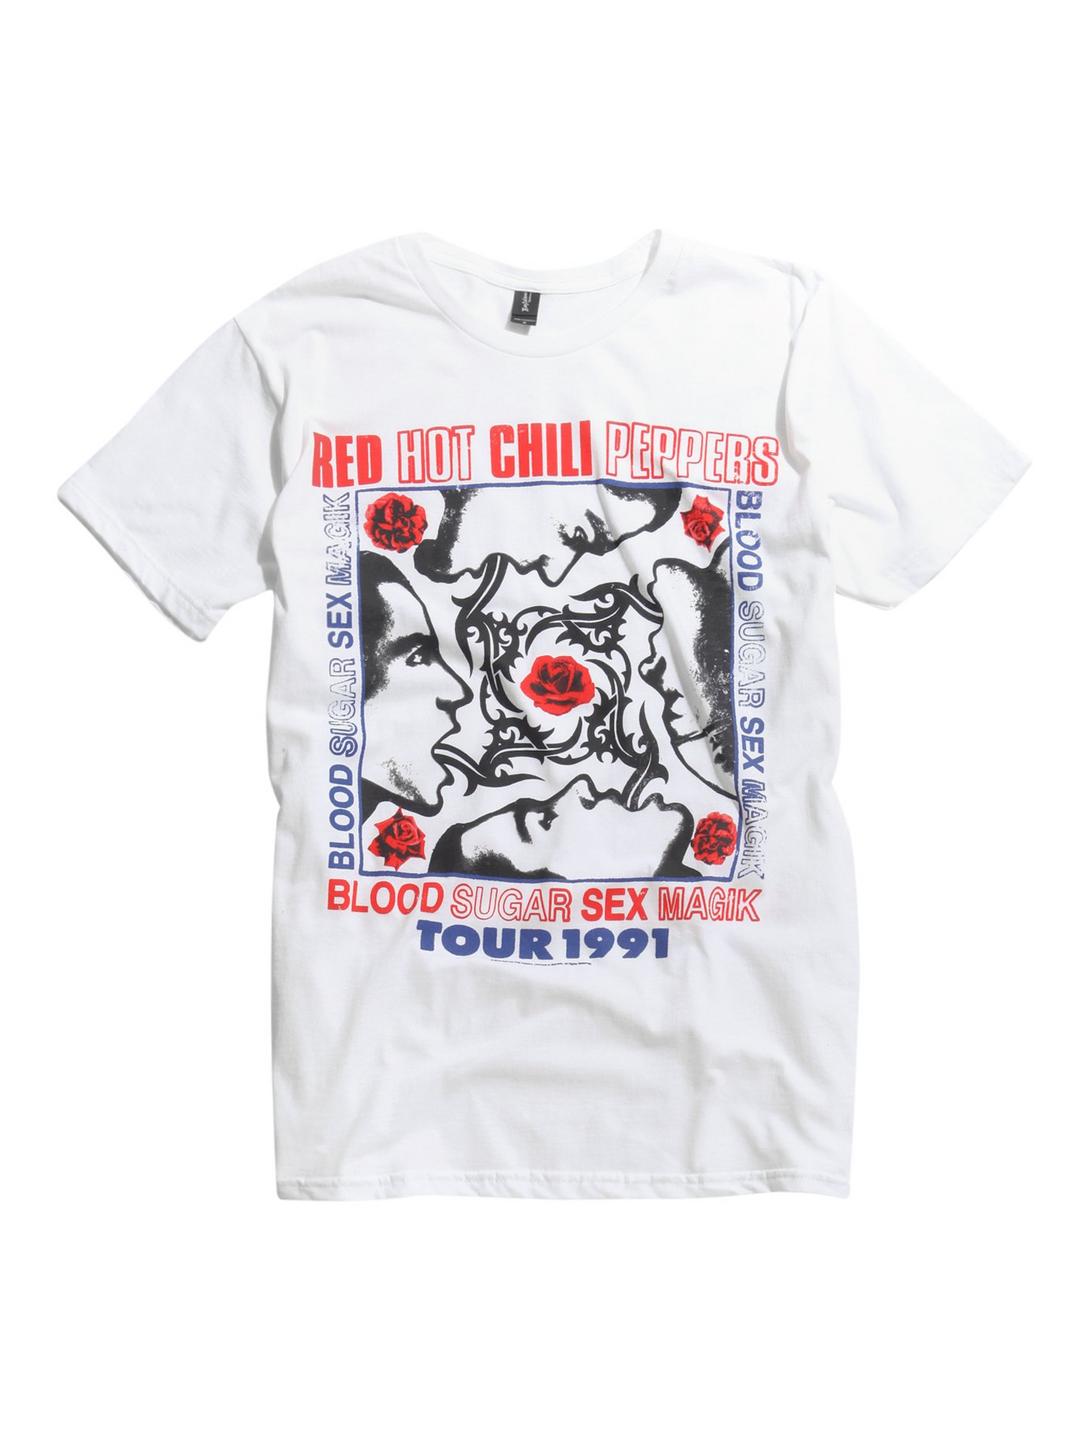 Red Hot Chili Peppers Blood Sugar Sex Magik Tour T-Shirt, WHITE, hi-res